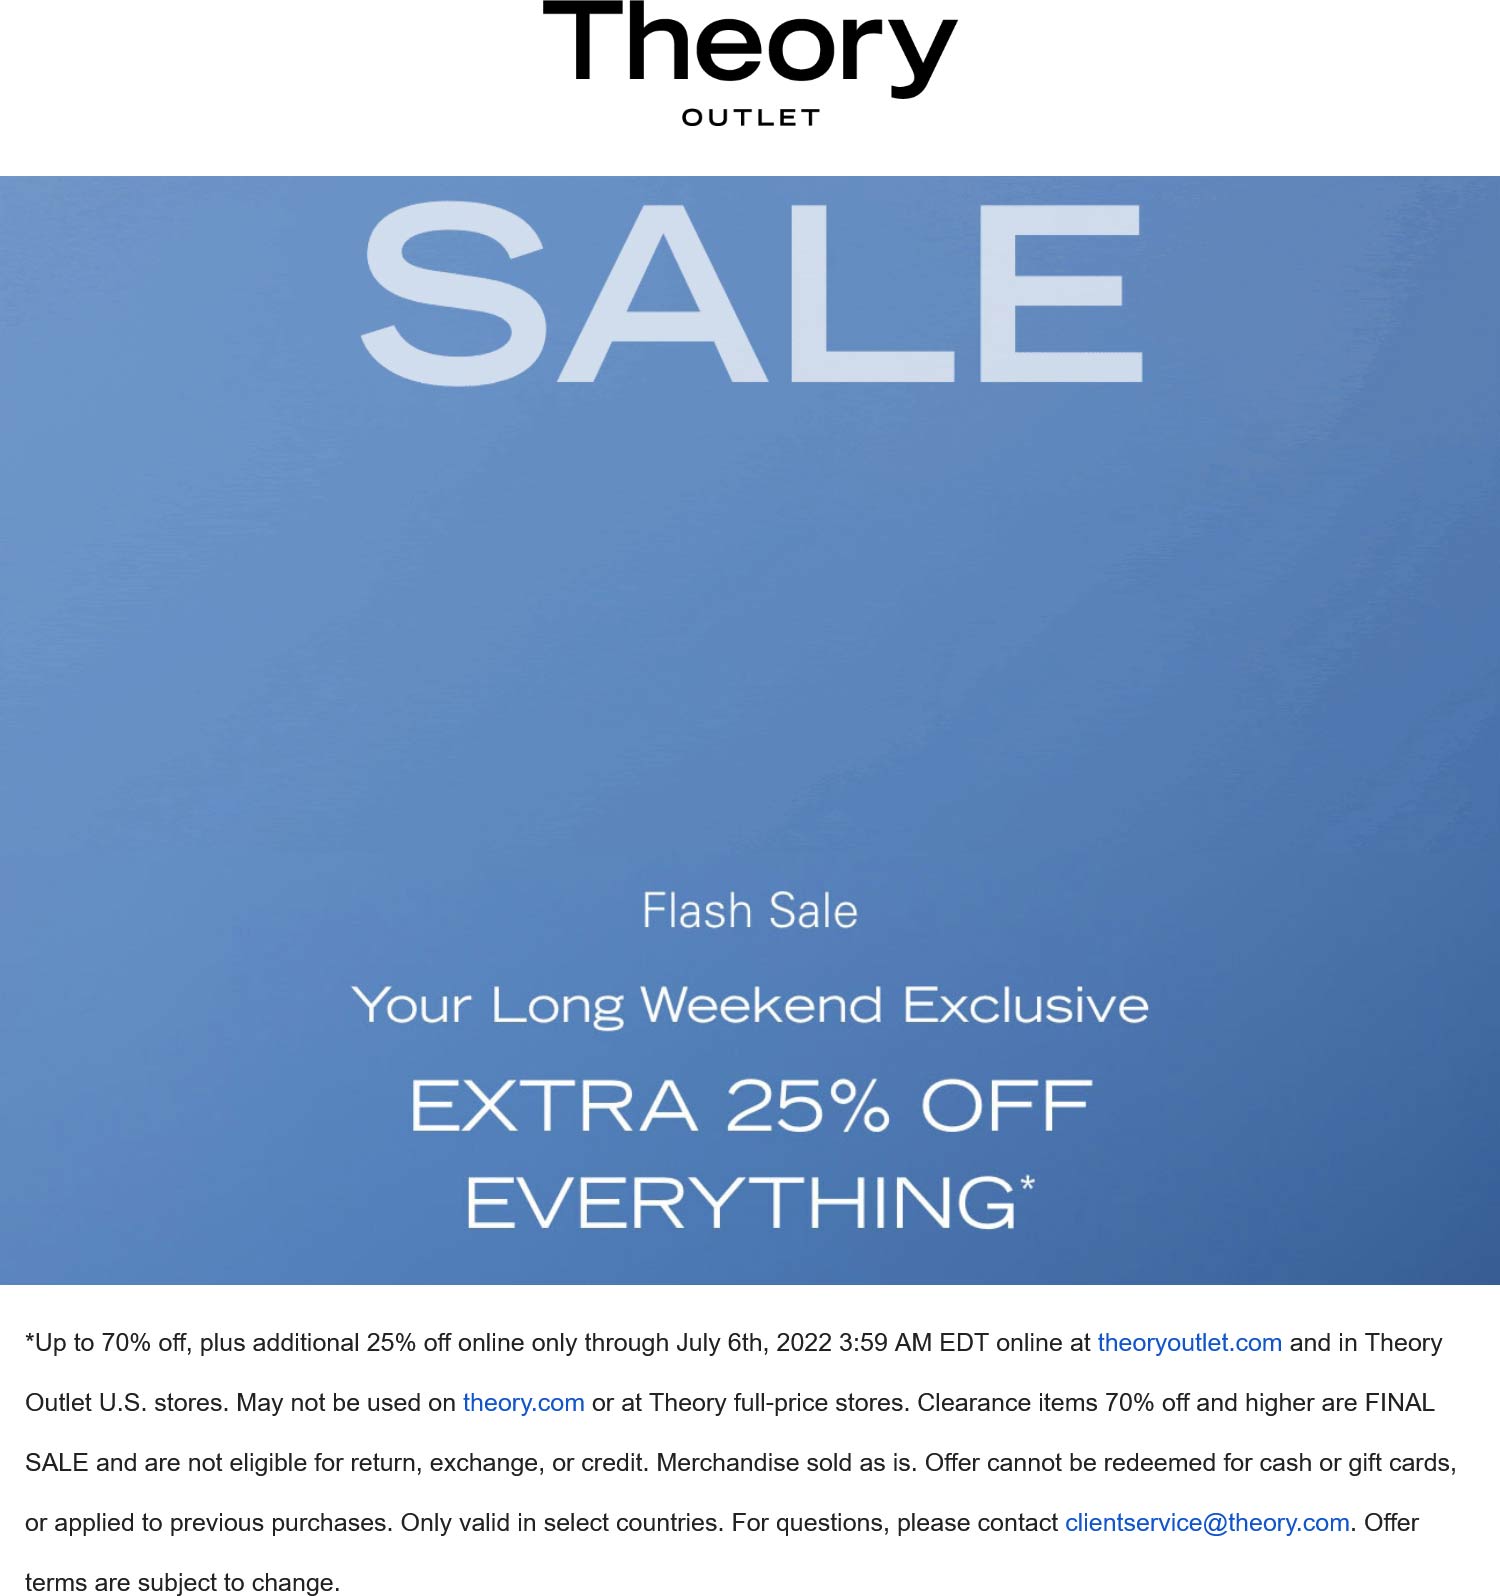 Theory Outlet stores Coupon  Extra 25% off at Theory Outlet, ditto online #theoryoutlet 